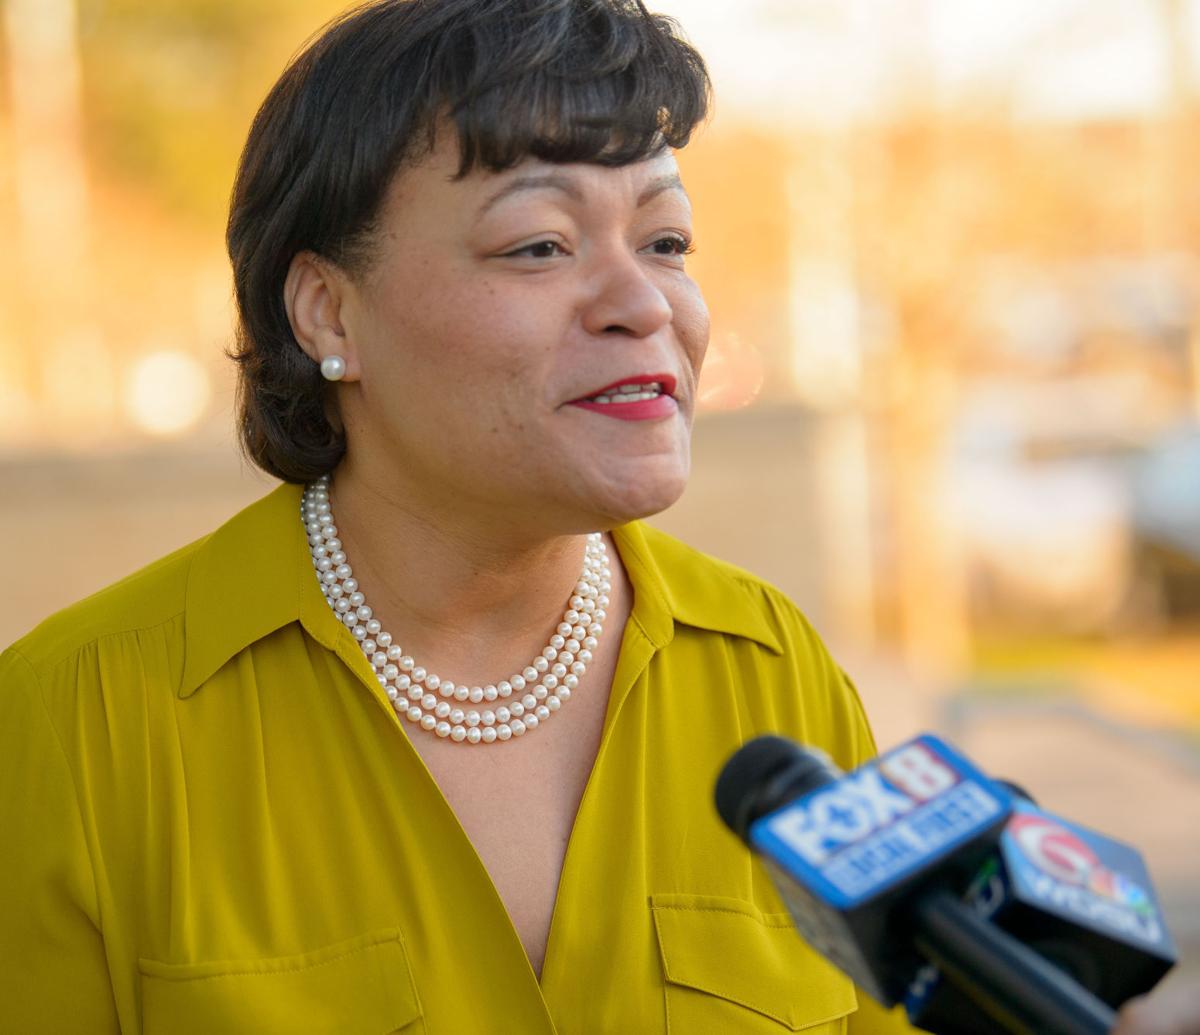 Here are the bills Mayorelect LaToya Cantrell says New Orleans will